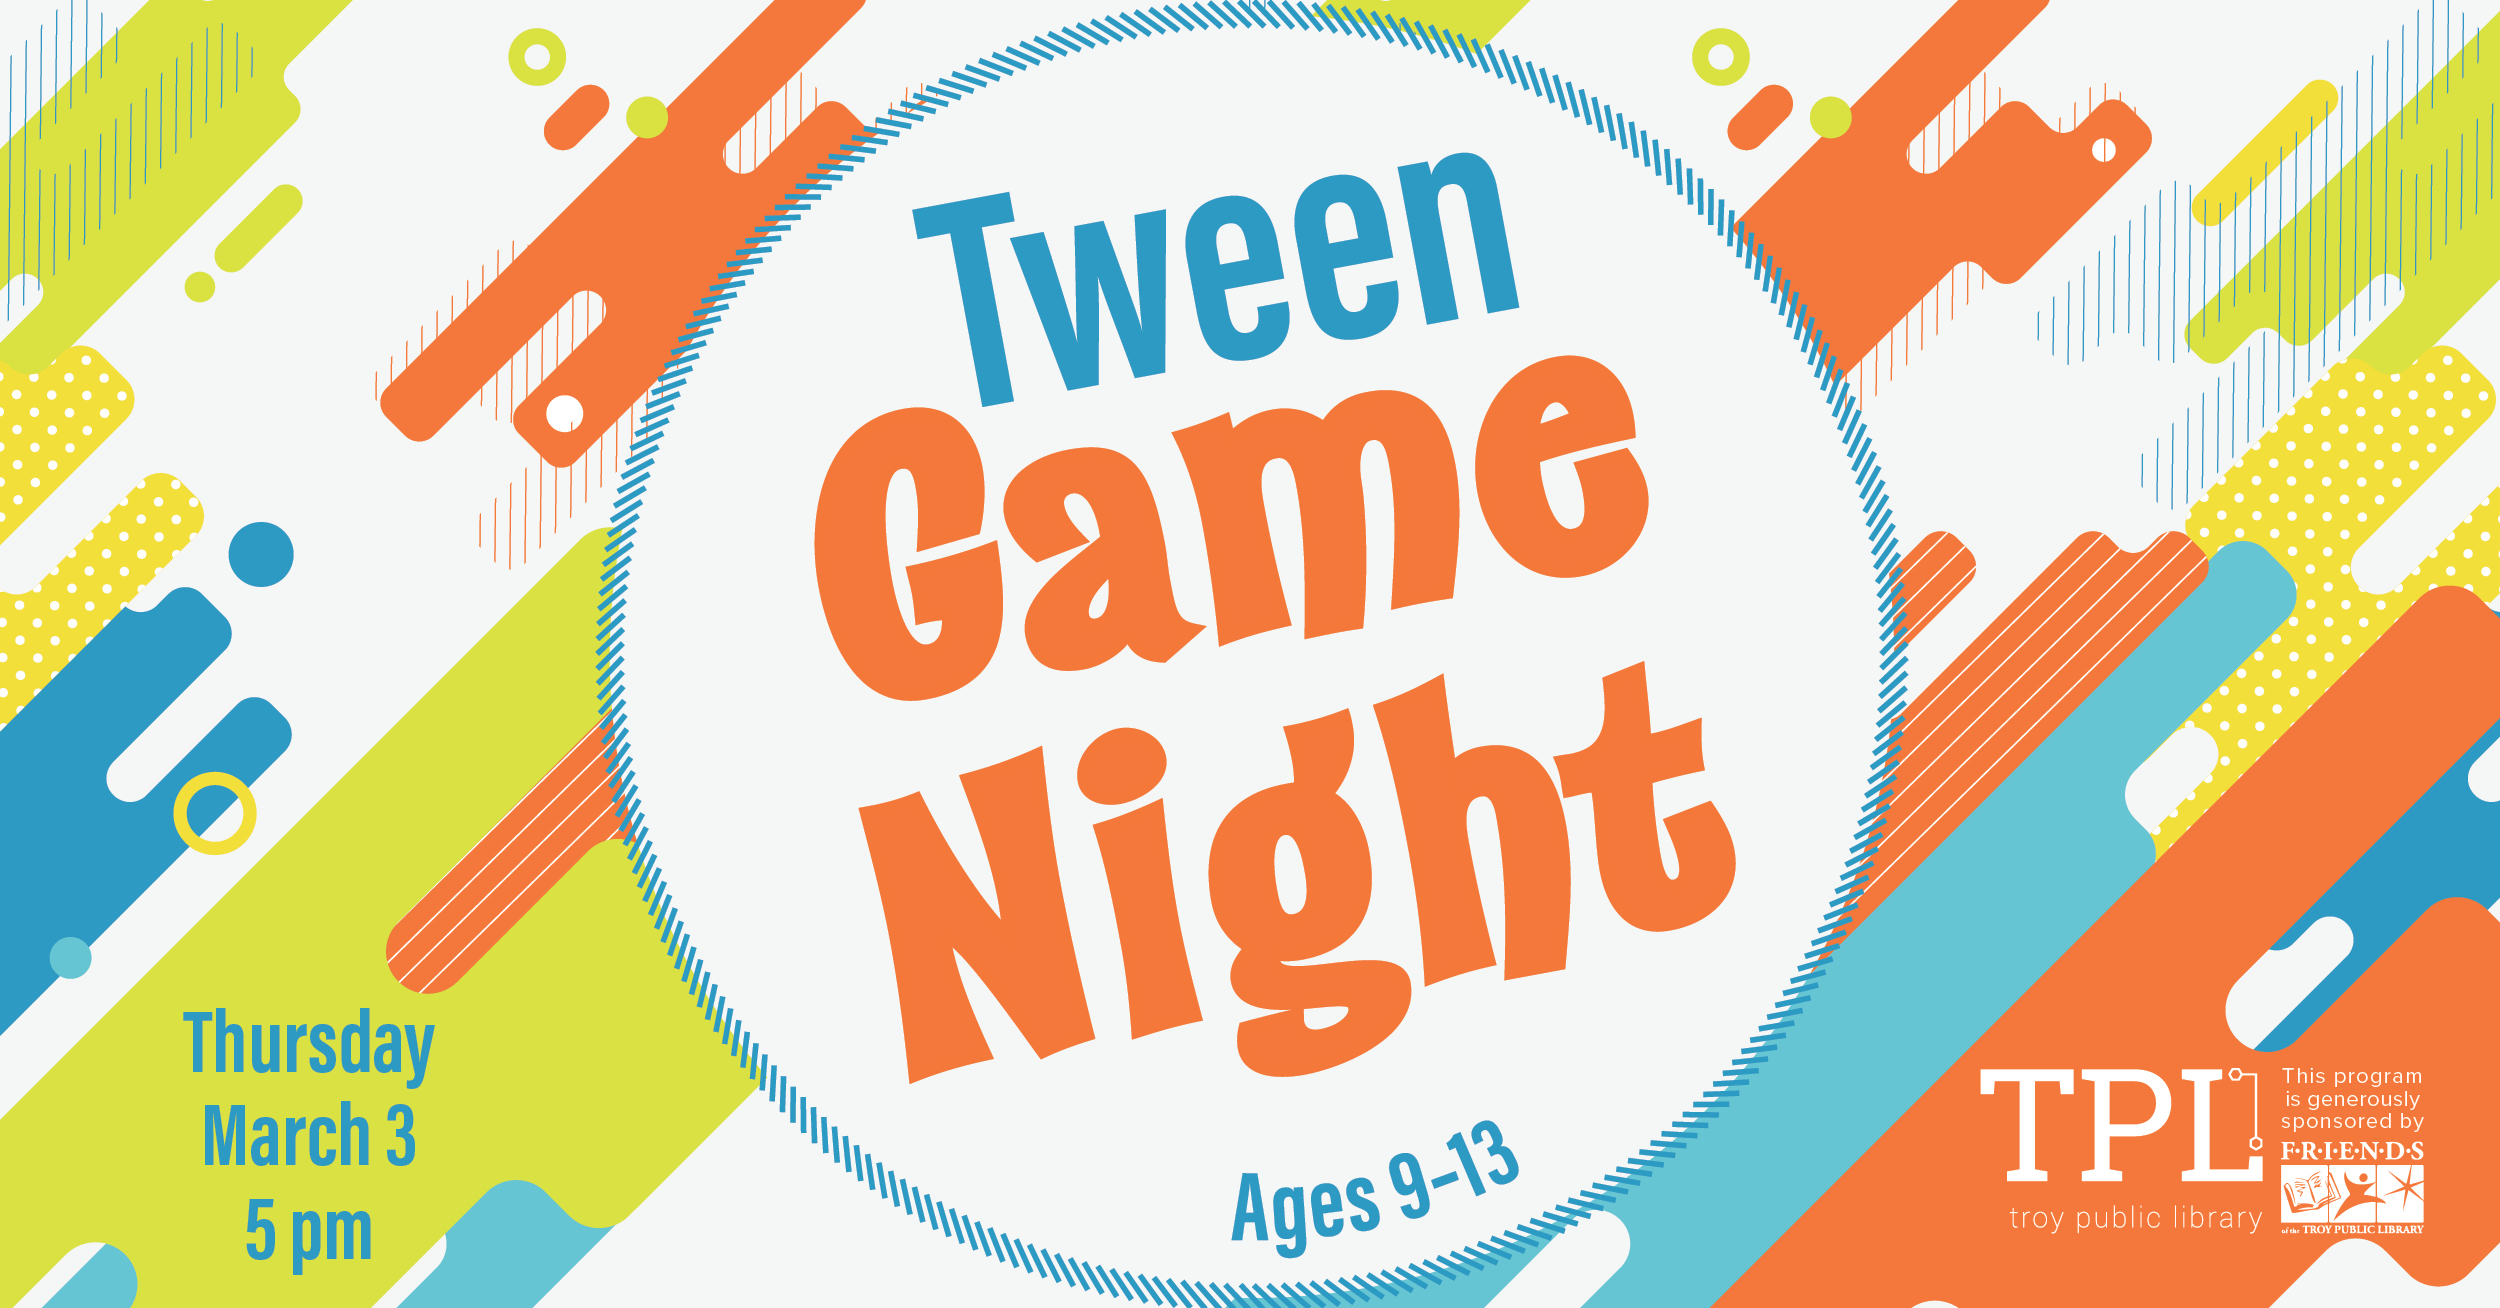 Tween Game Night. Ages 9-13. Thursday, March 3 at 5pm. Sponsored by the Friends of the Troy Public Library